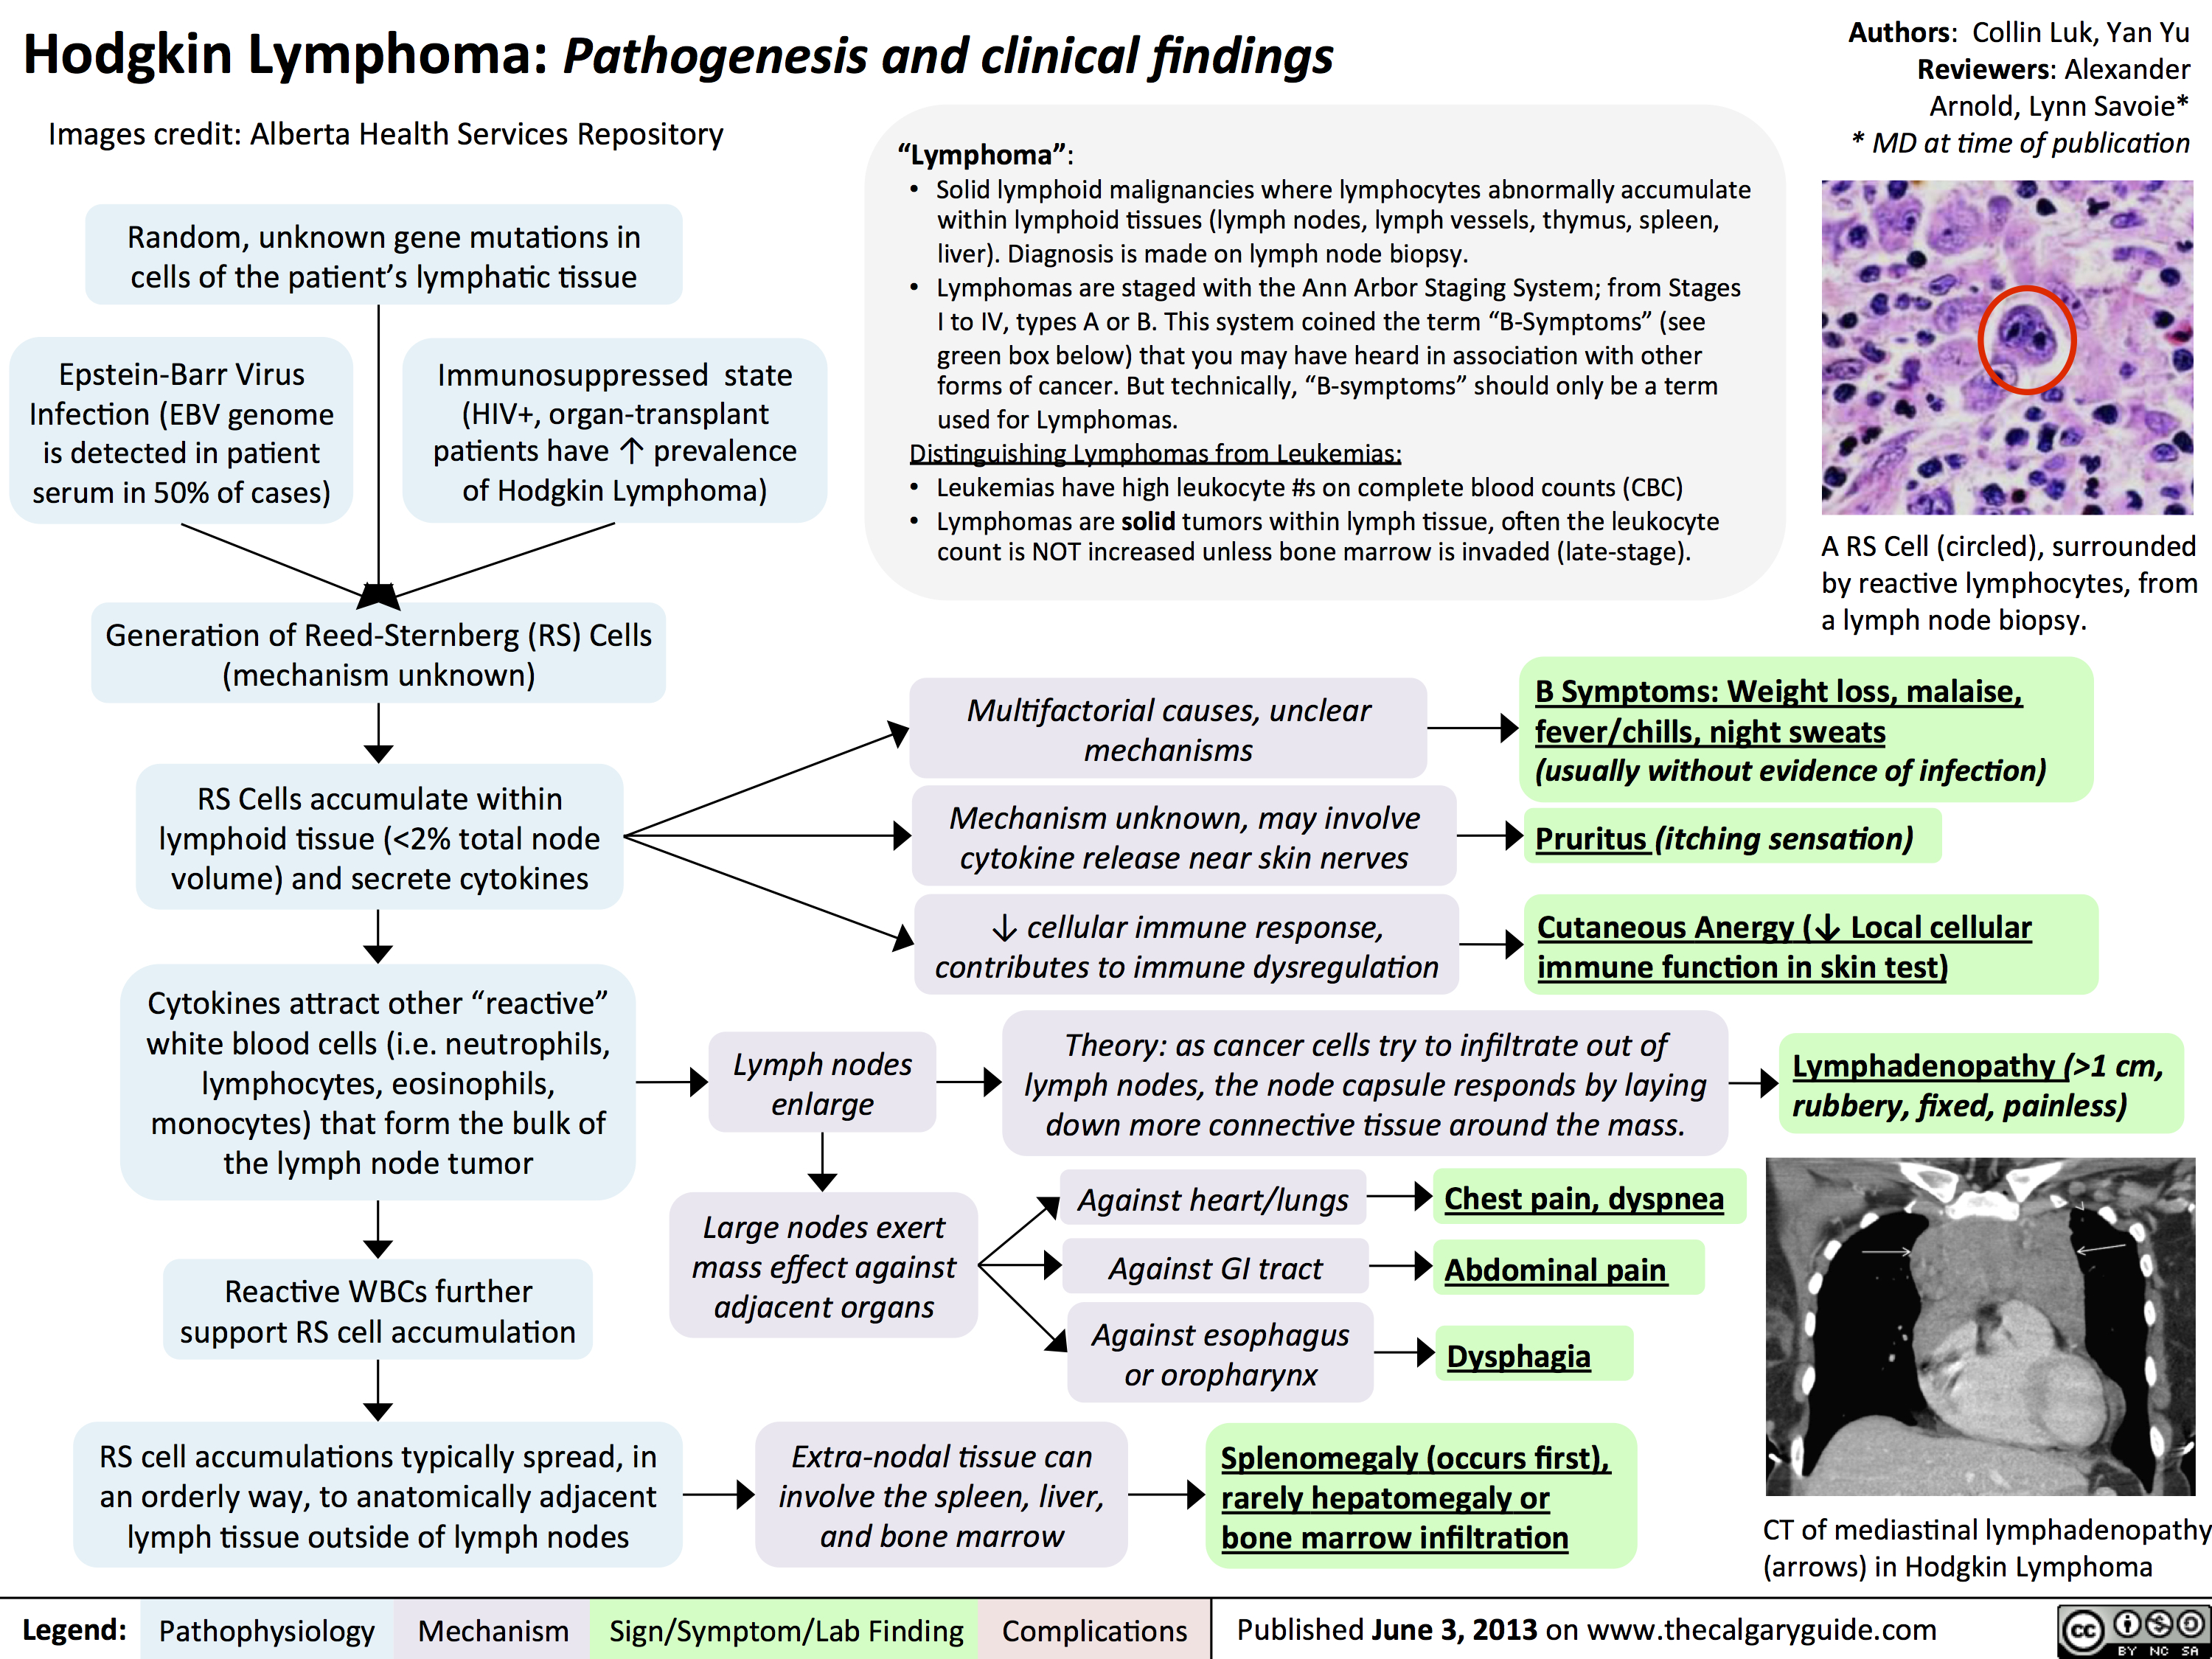 hodgkin lymphoma - pathogenesis and clinical findings